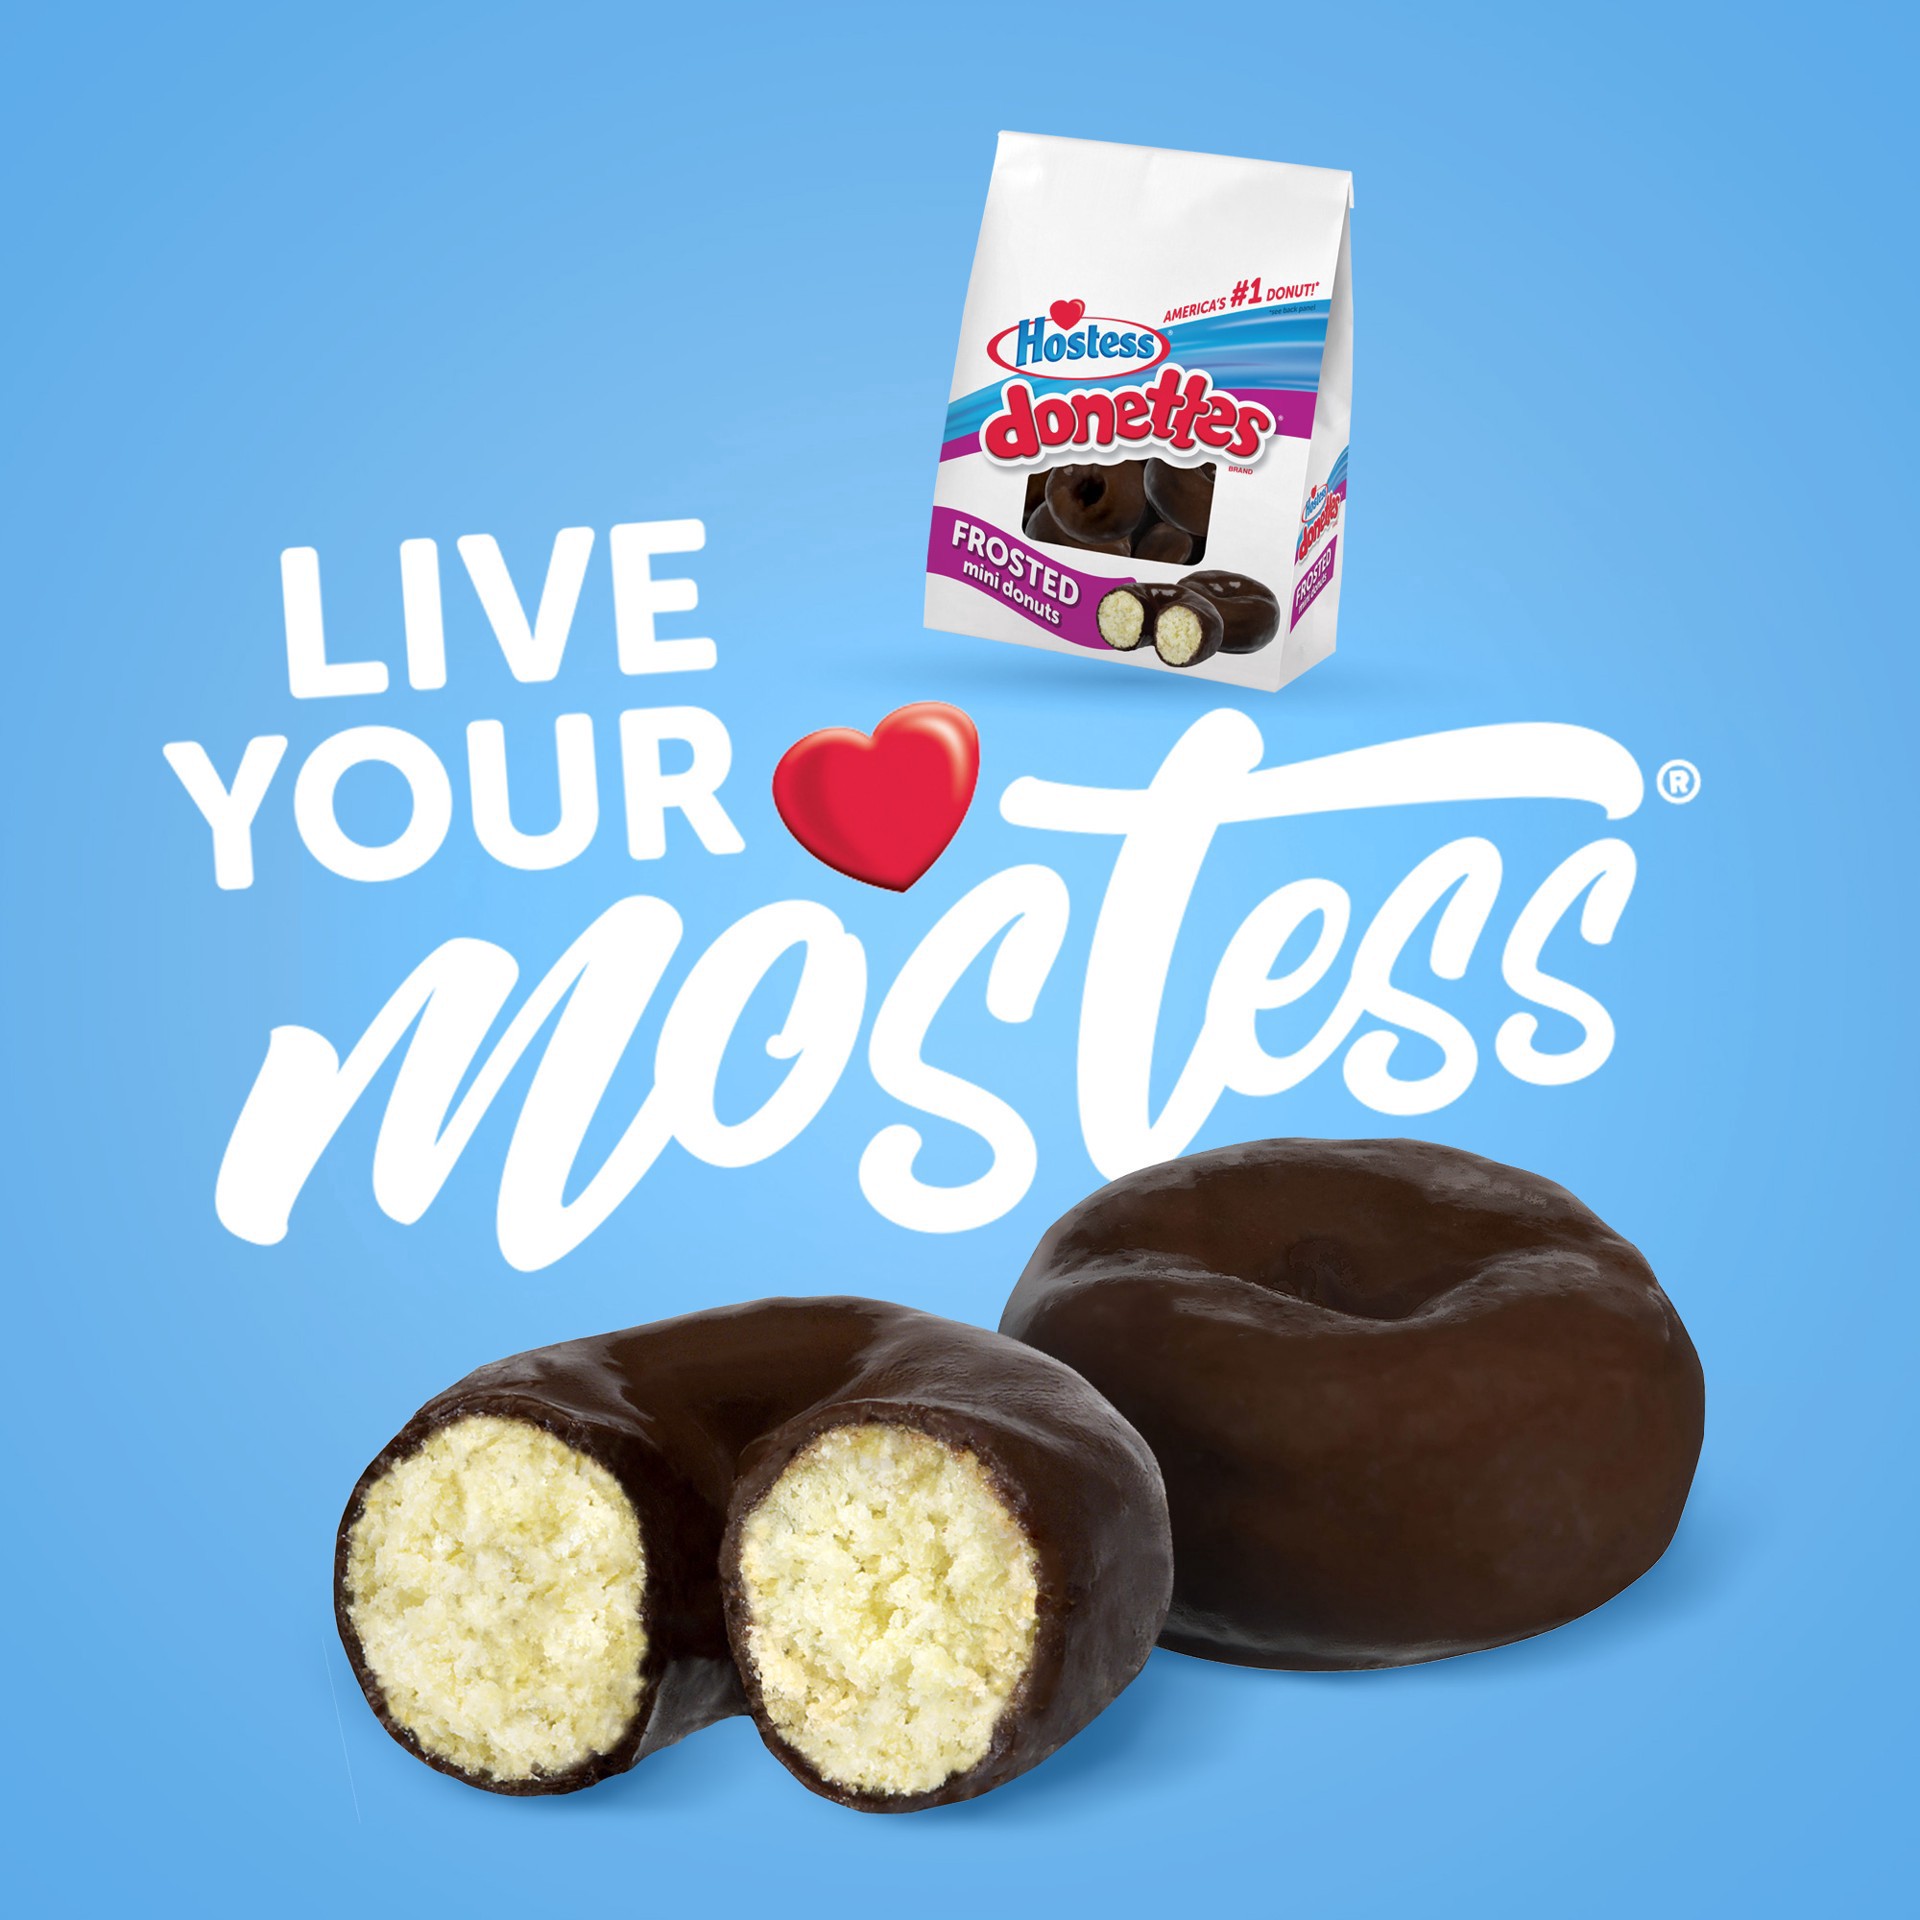 slide 20 of 29, HOSTESS Frosted Mini DONETTES Bag, Chocolate Breakfast Treats, 11.25 oz